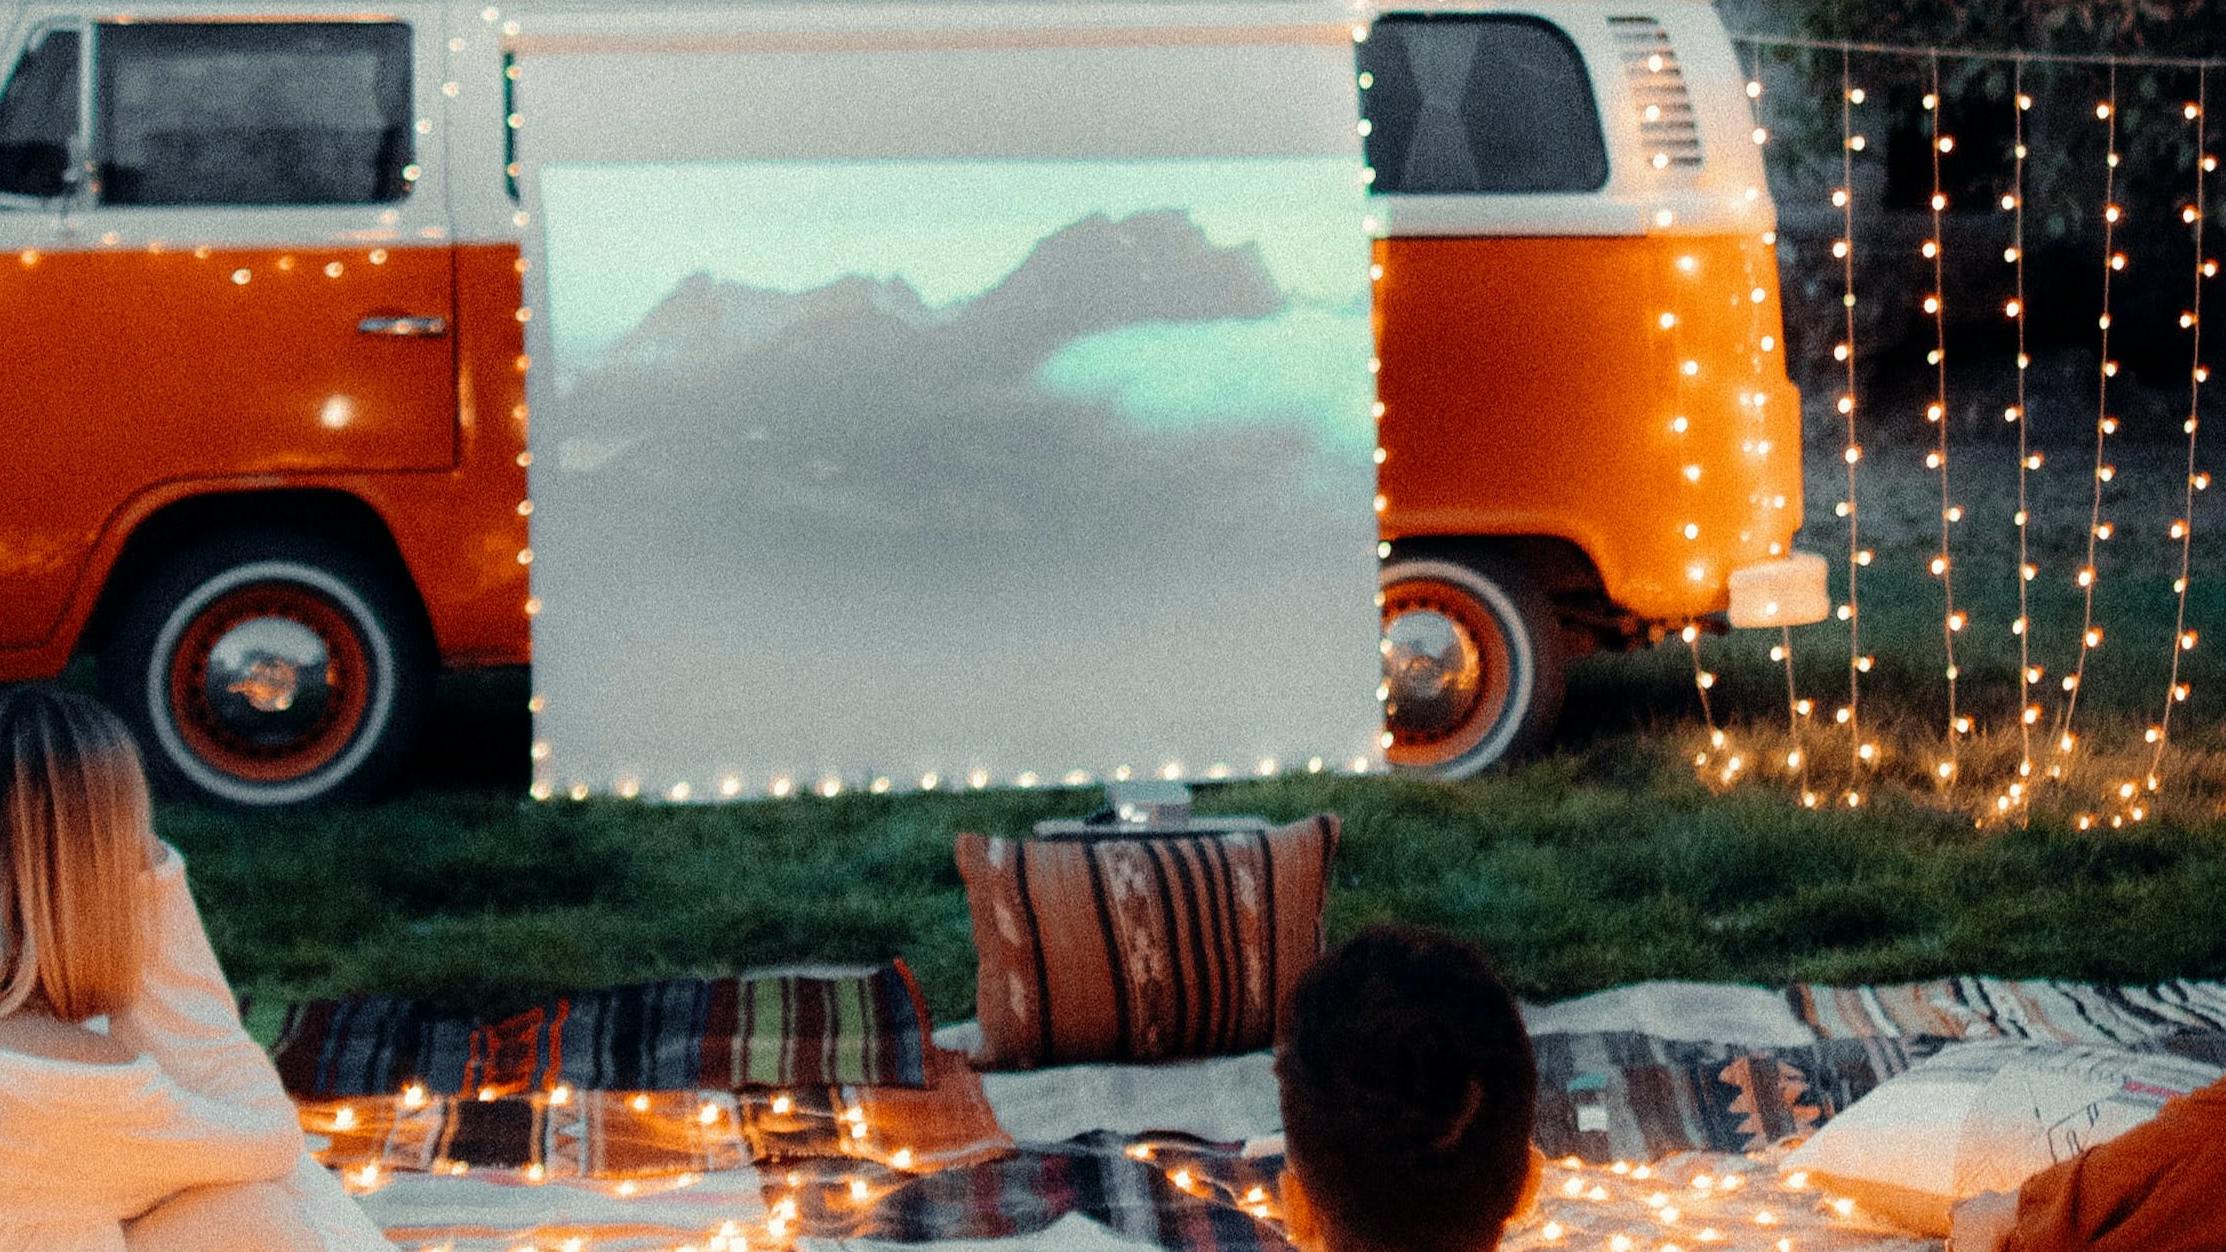 Several people watching a movie on a projector screen. There is an organge van that's holding up the projector screen and the movie watchers are sitting on picnic blankets. 